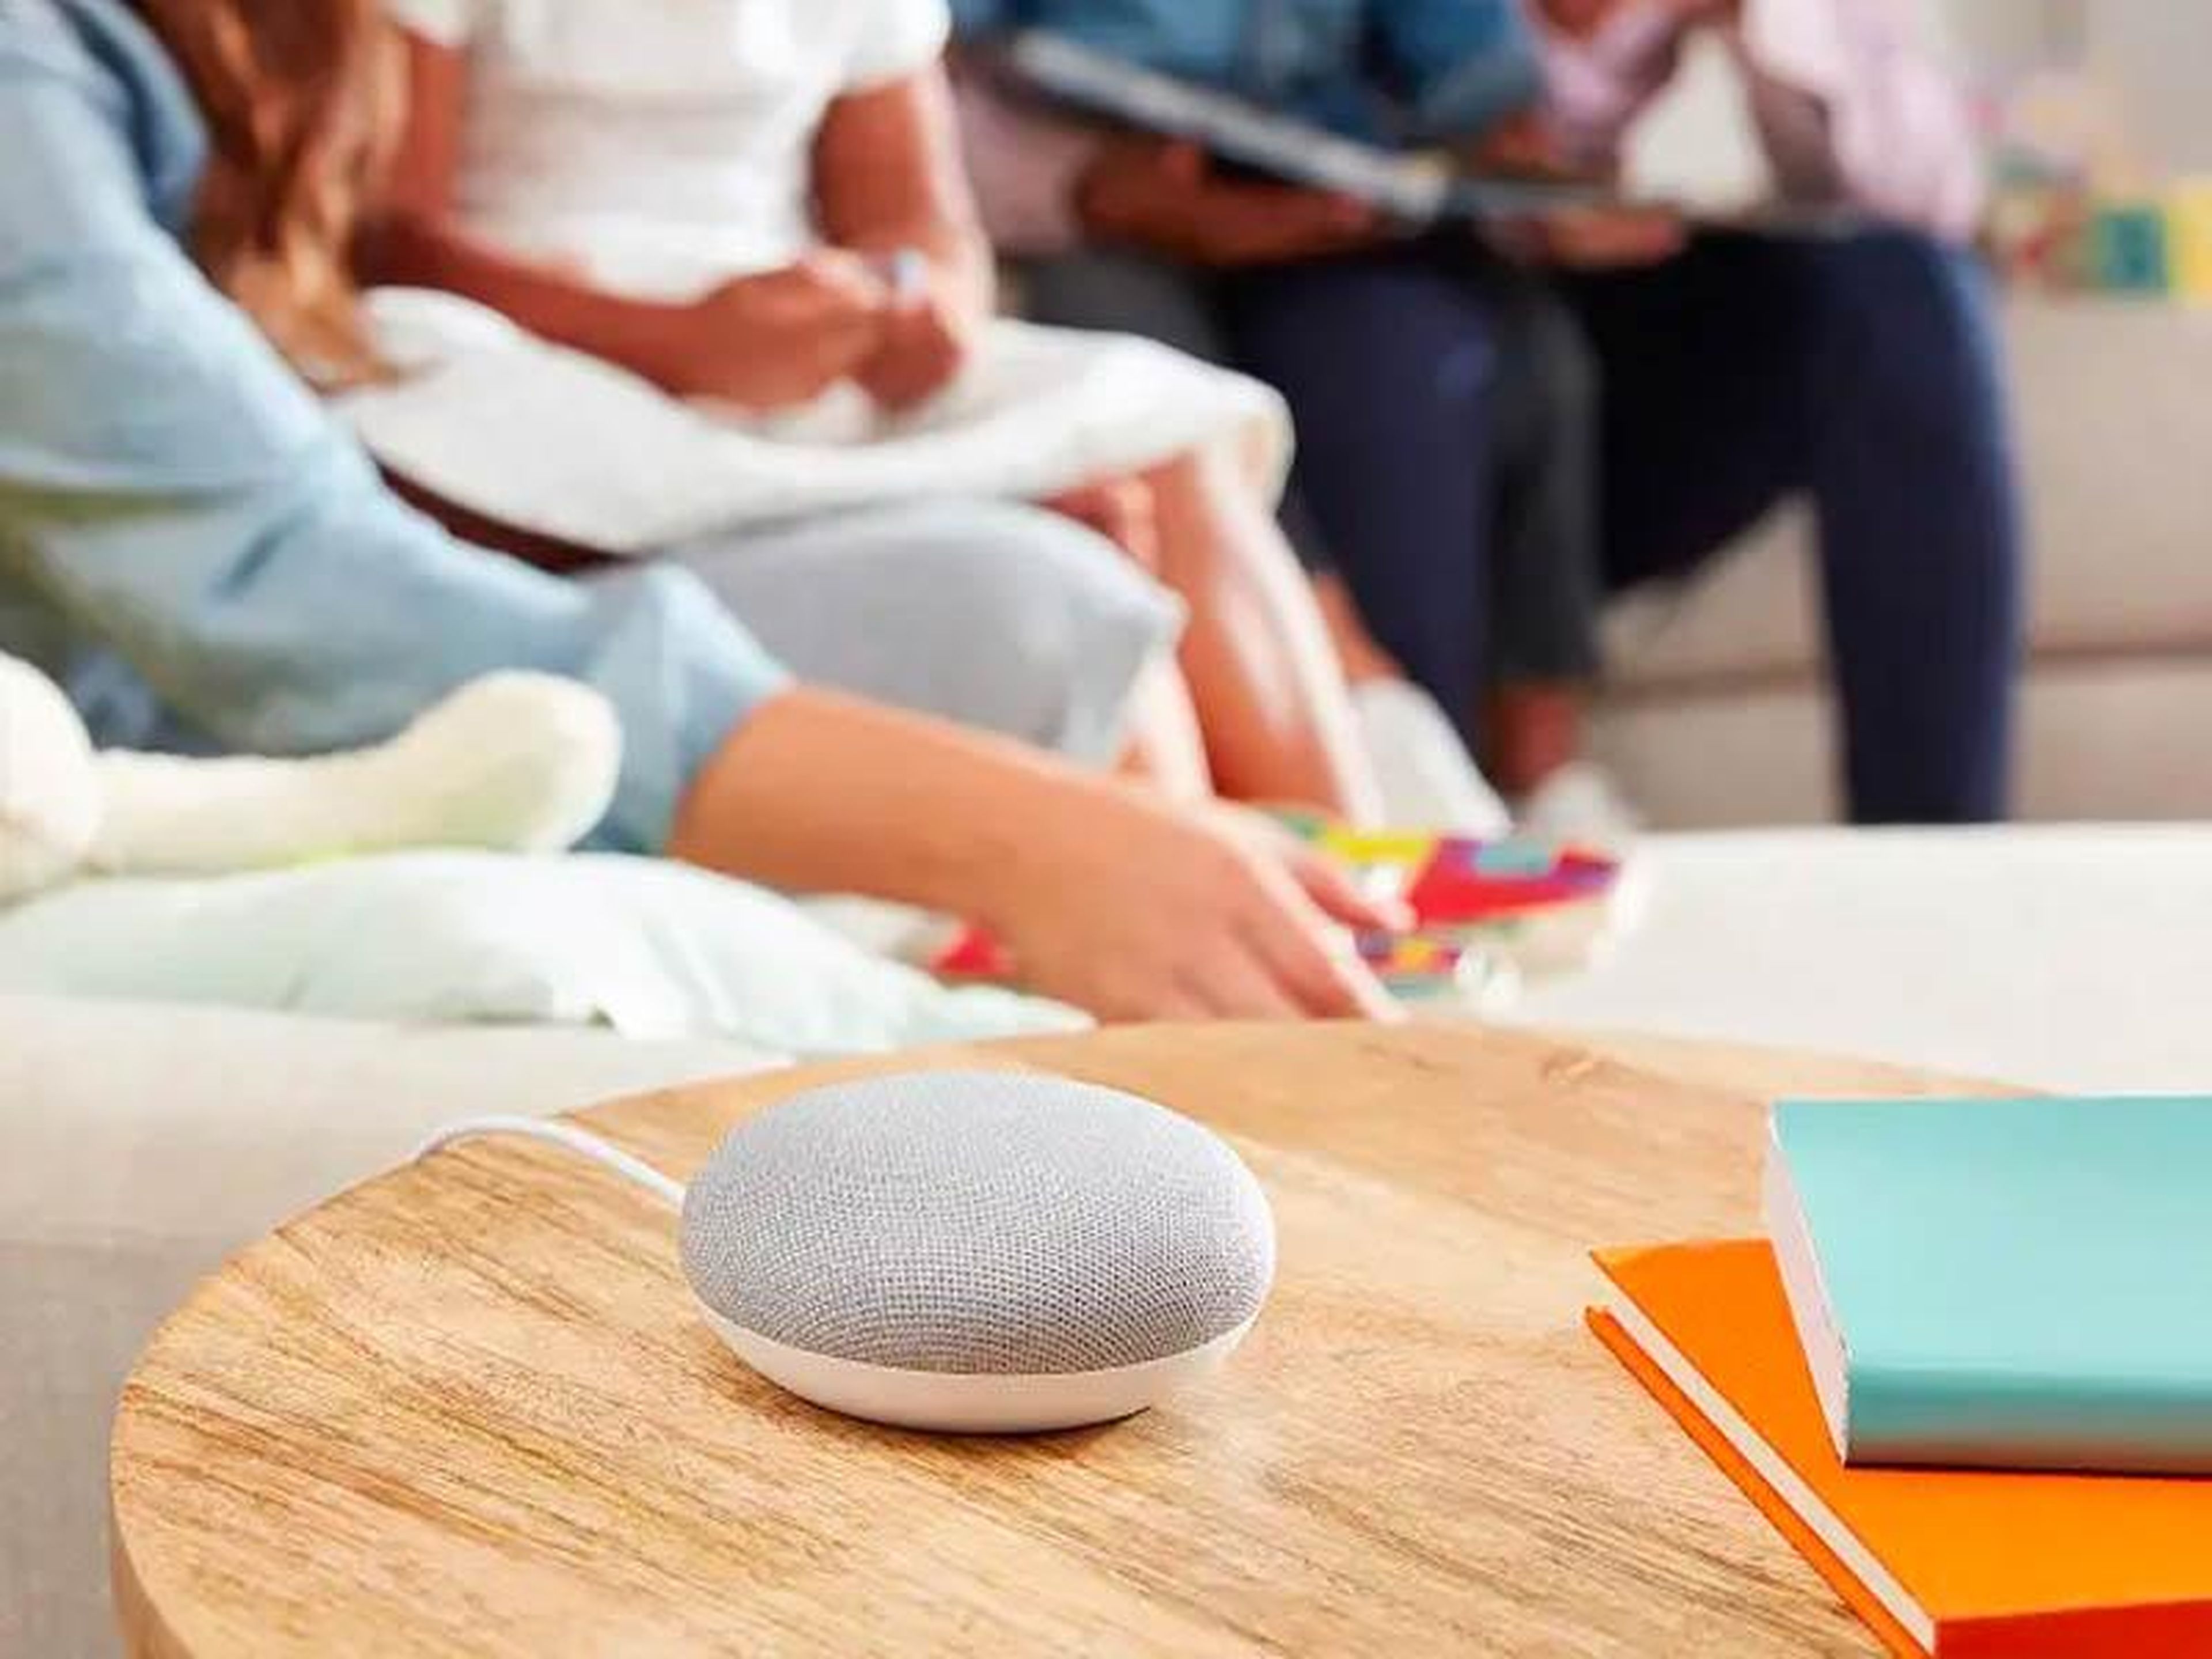 Get a Google Home Mini for $25 at Best Buy.